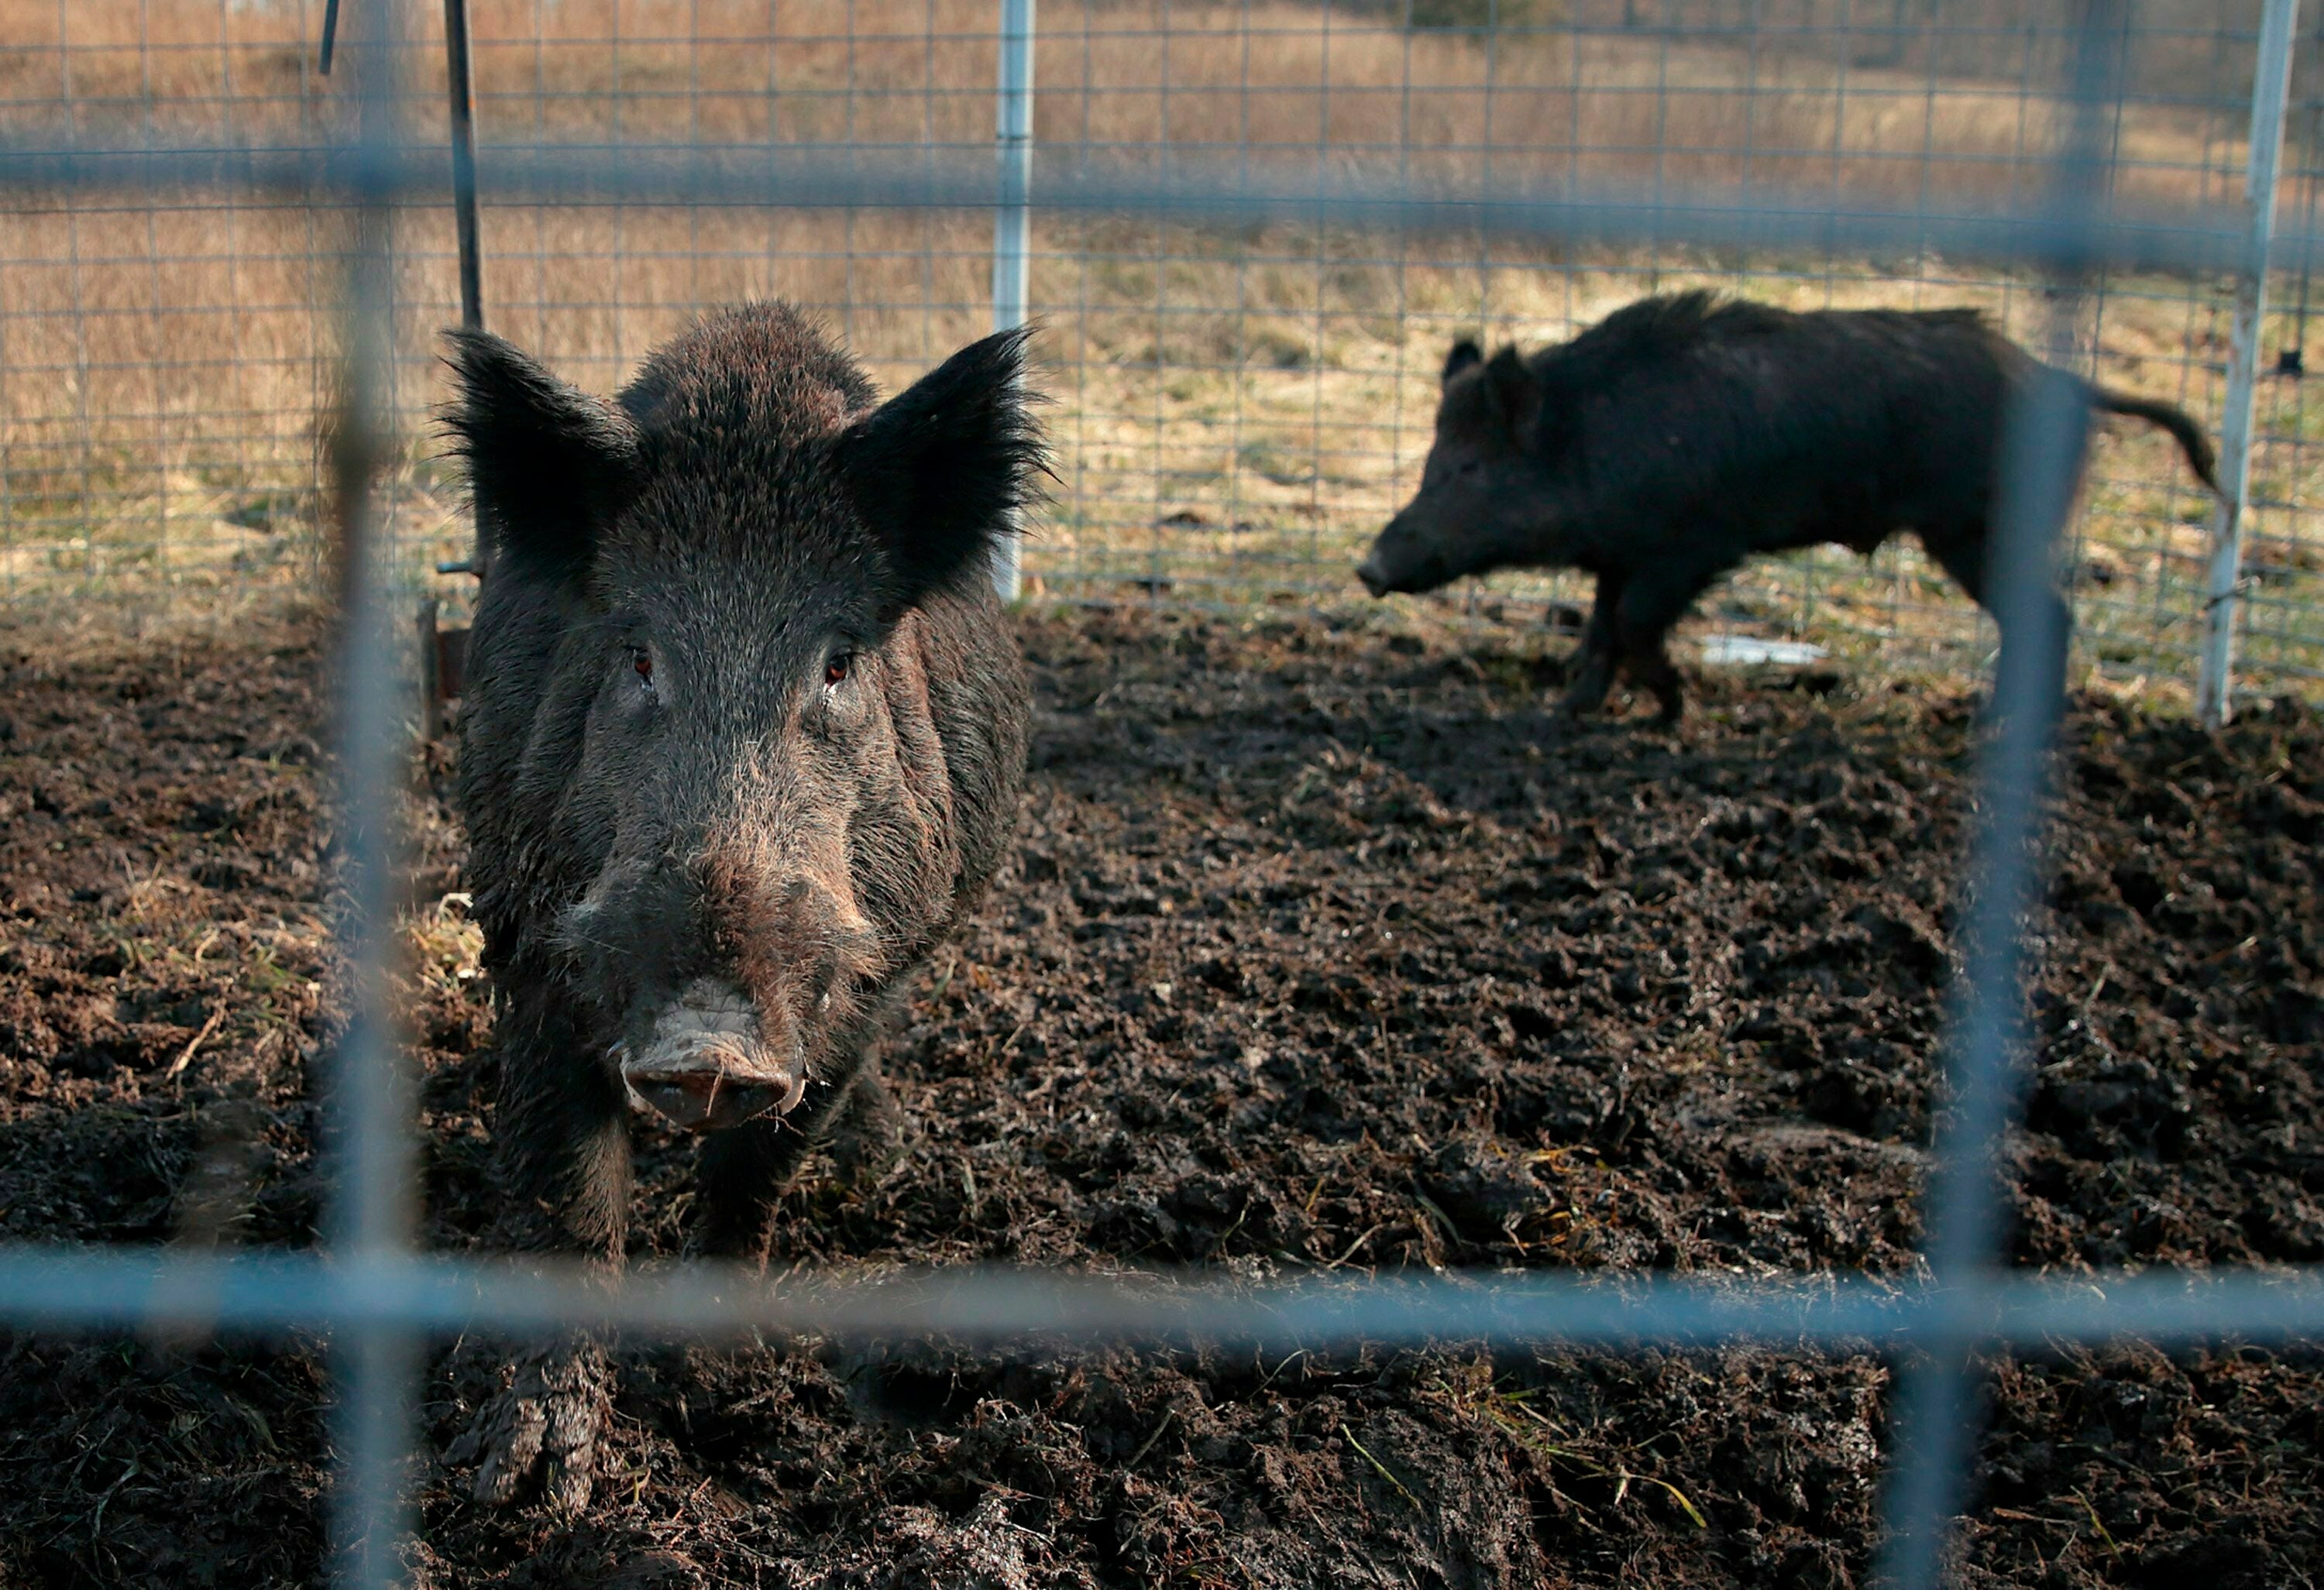 Two feral hogs caught in a trap on a farm in rural Montana in 2019